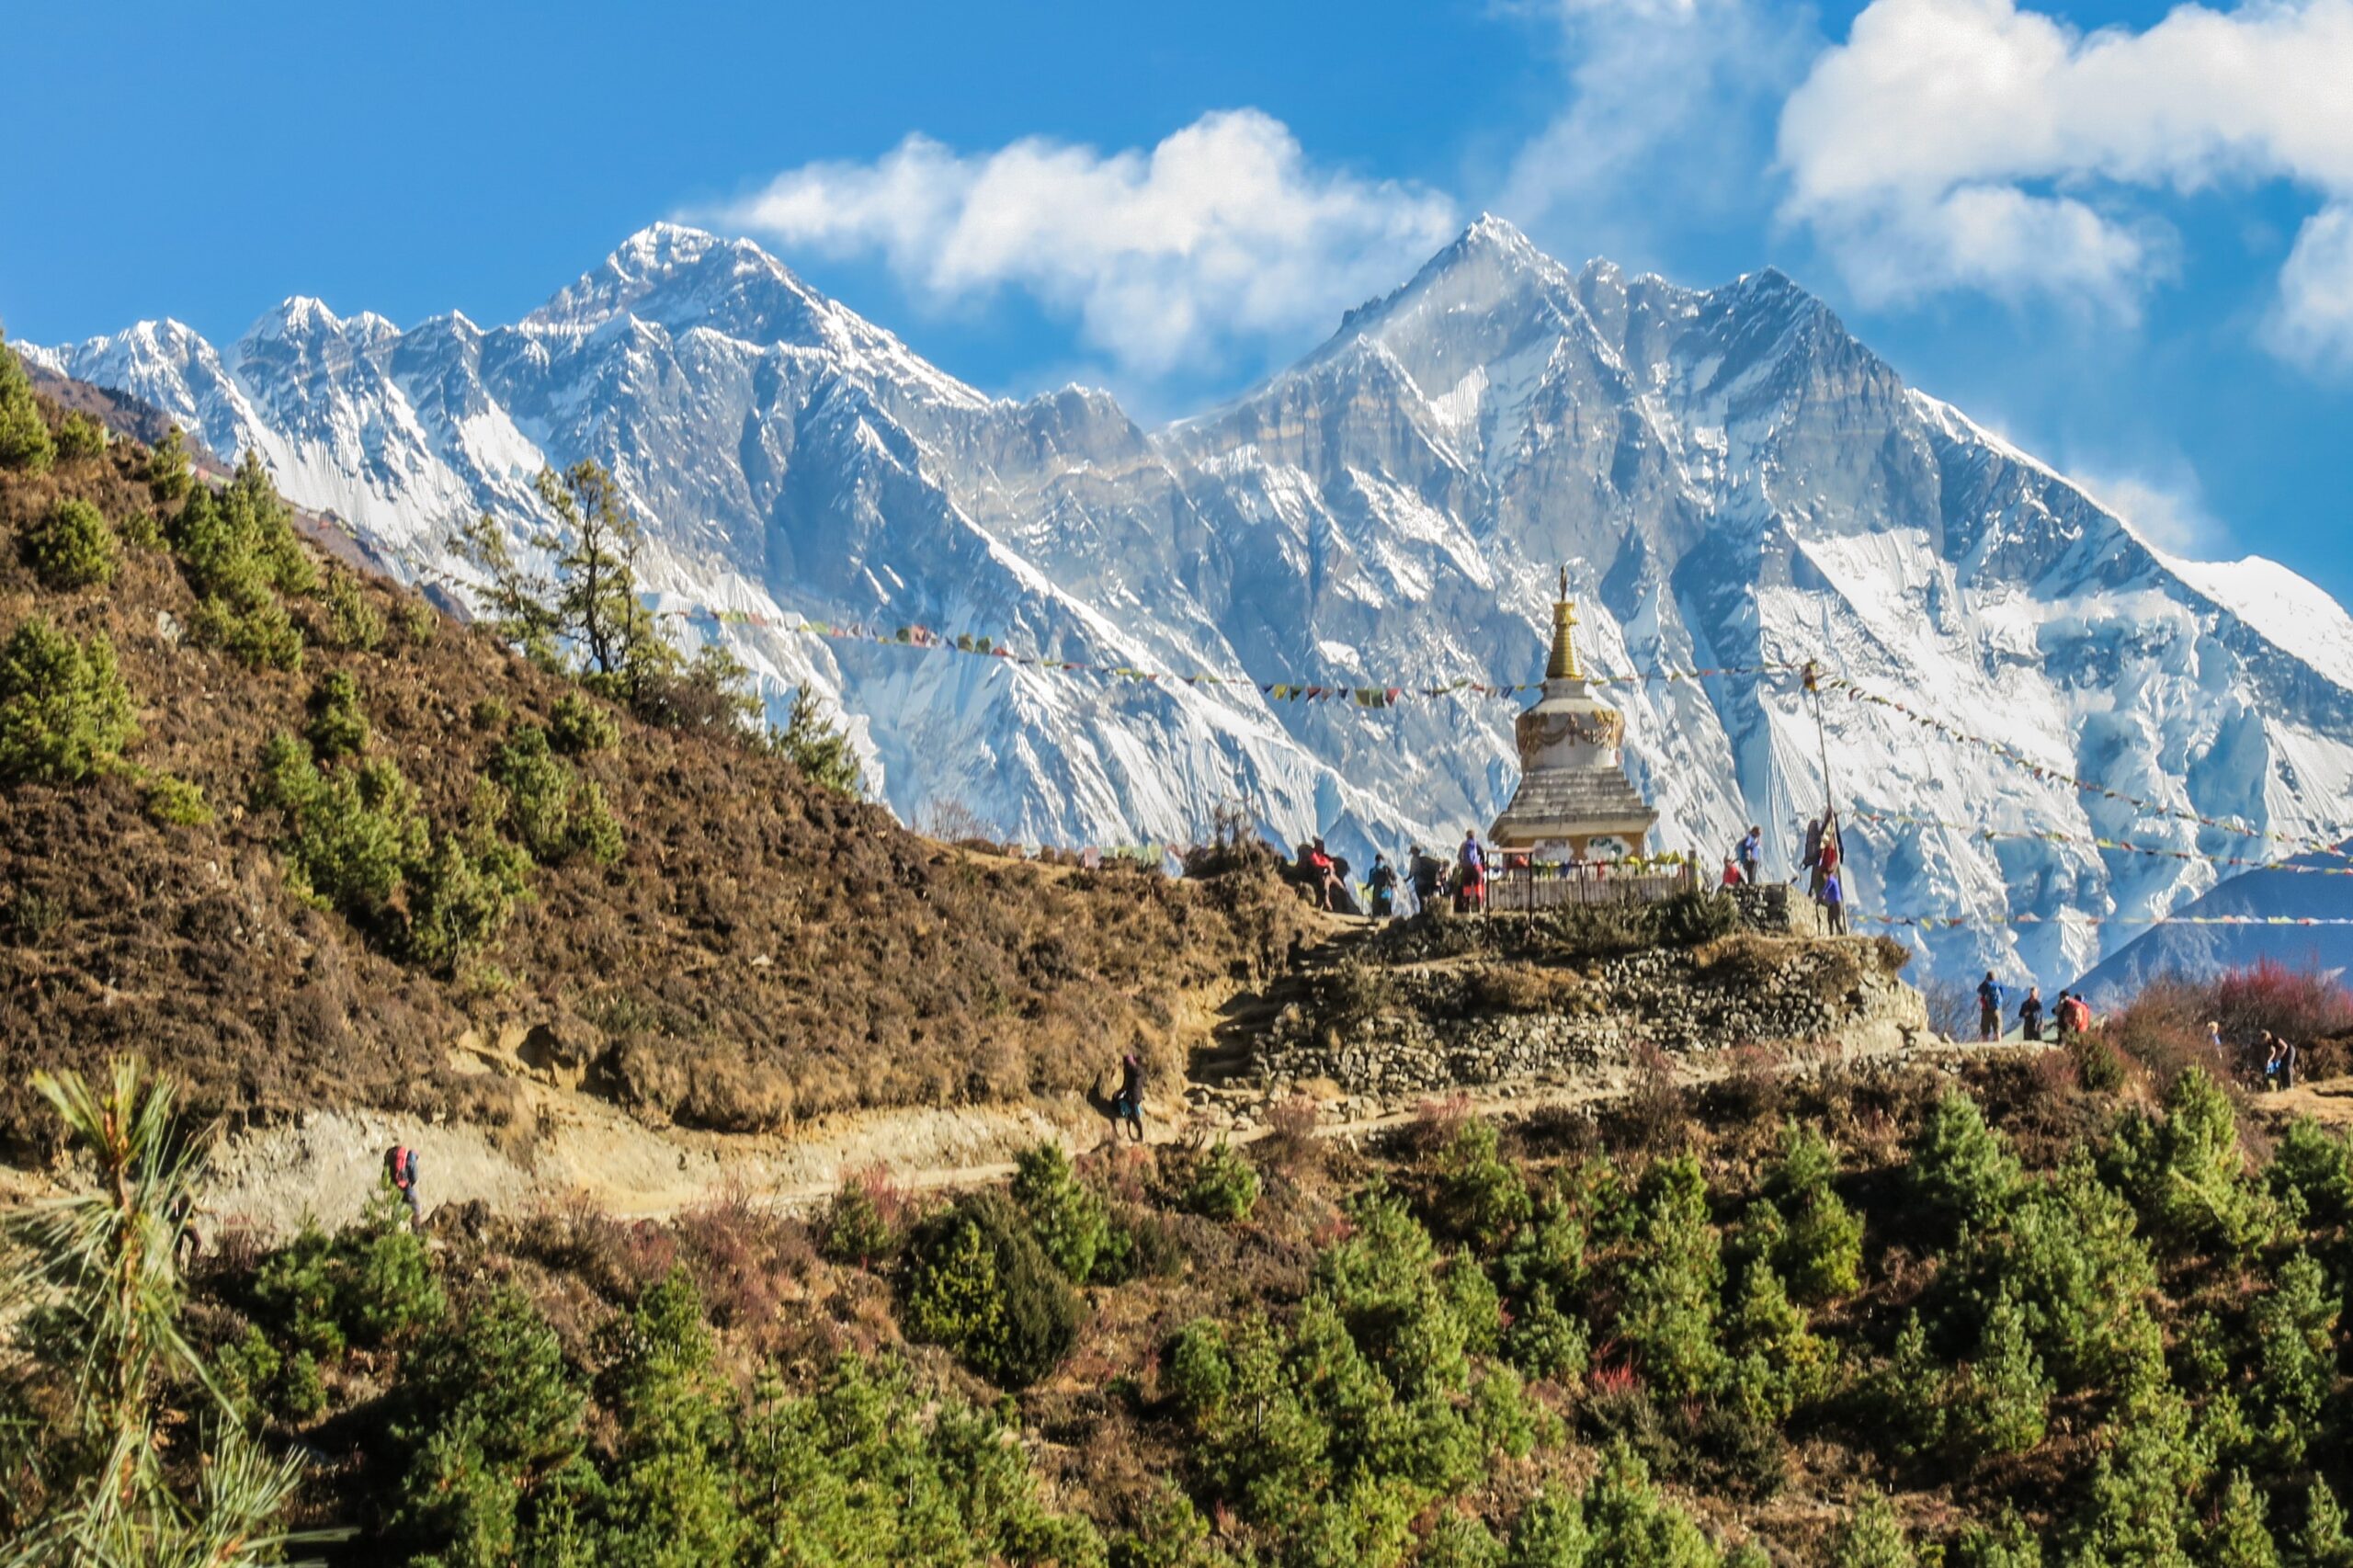 The Best Time To Hike To Everest Base Camp